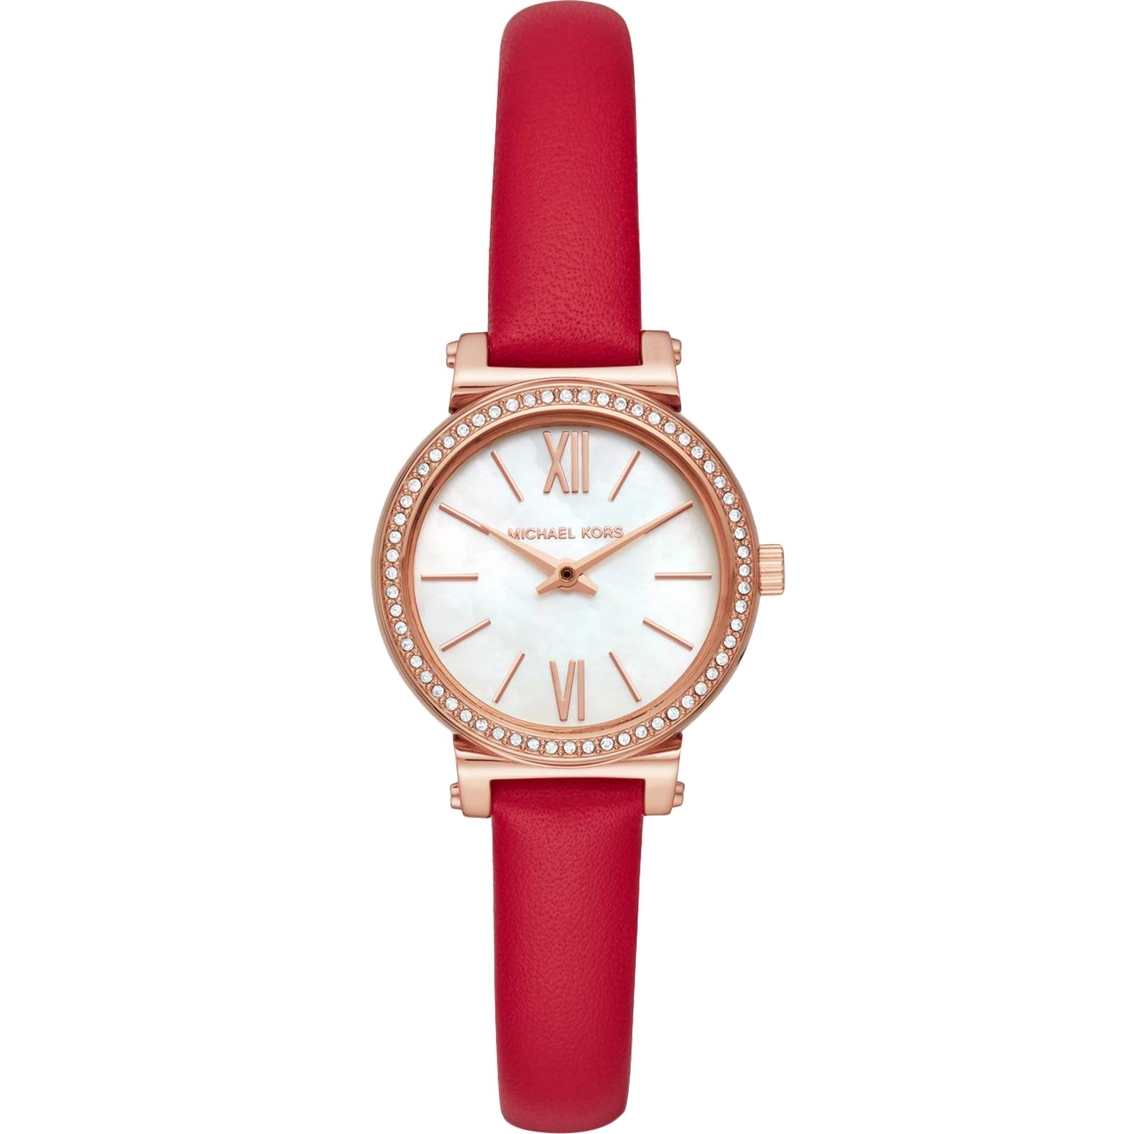 Michael Kors Women's Leather Strap Petite Sofie Watch | Leather Band ...